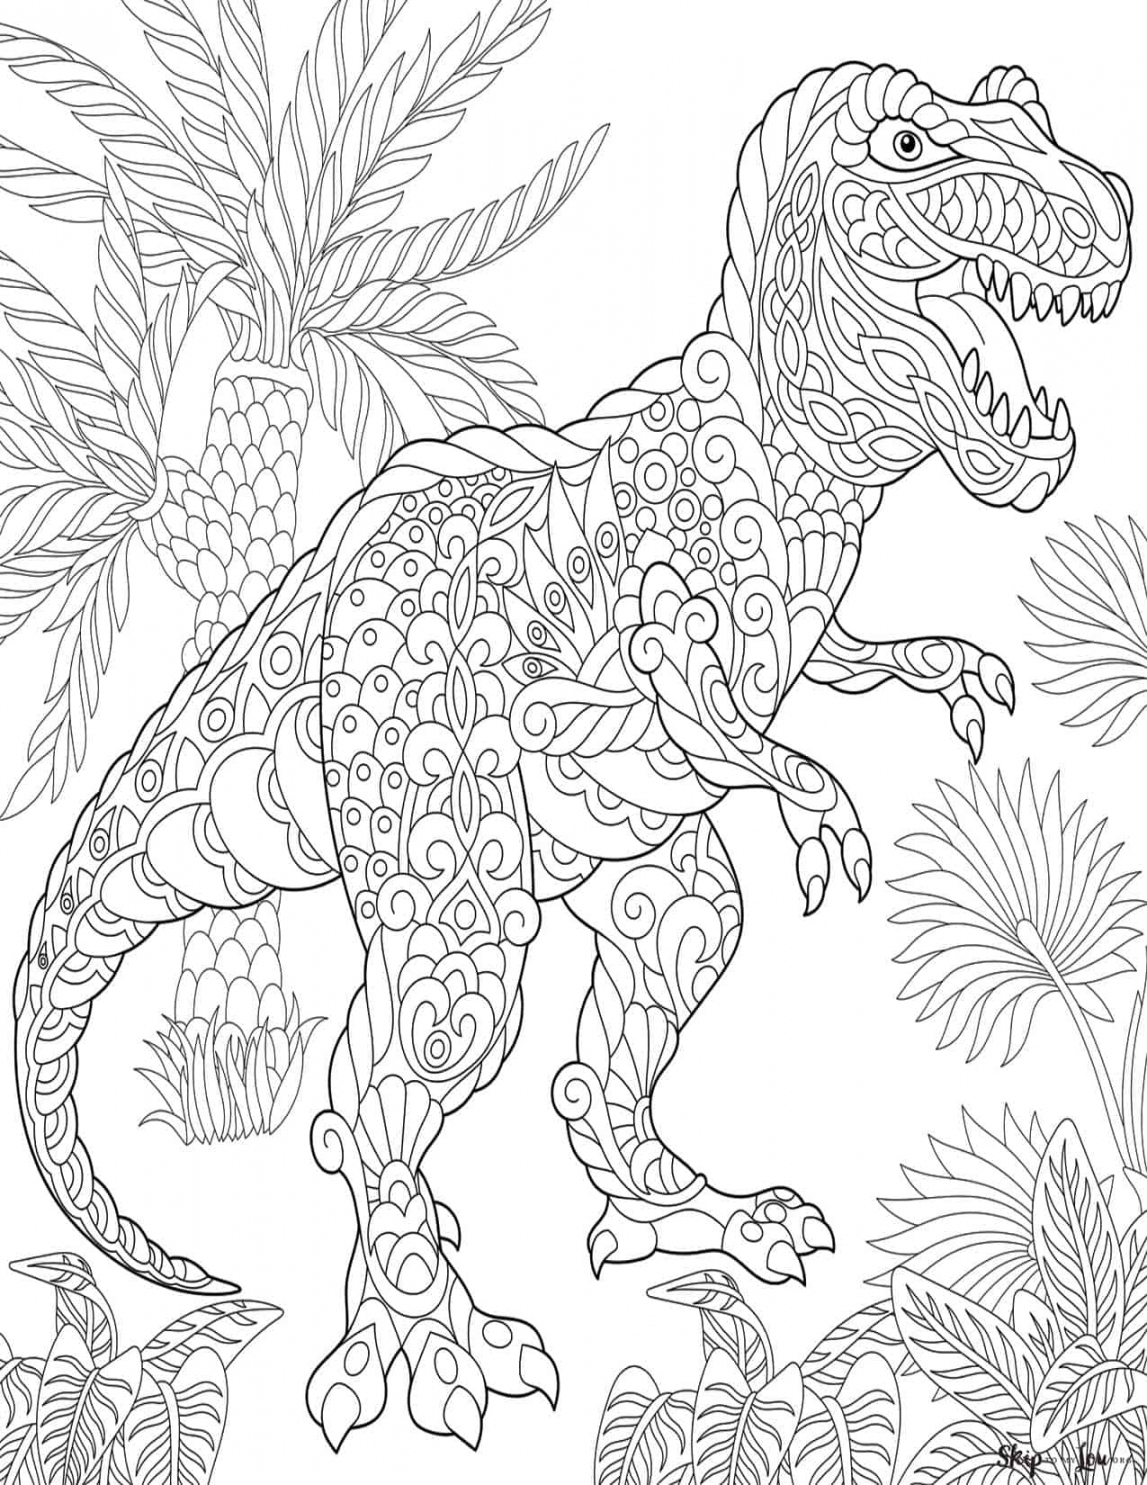 Dinosaur Coloring Pages Printable Free - Printable - Dinosaur Coloring Pages Free Printables  Skip To My Lou